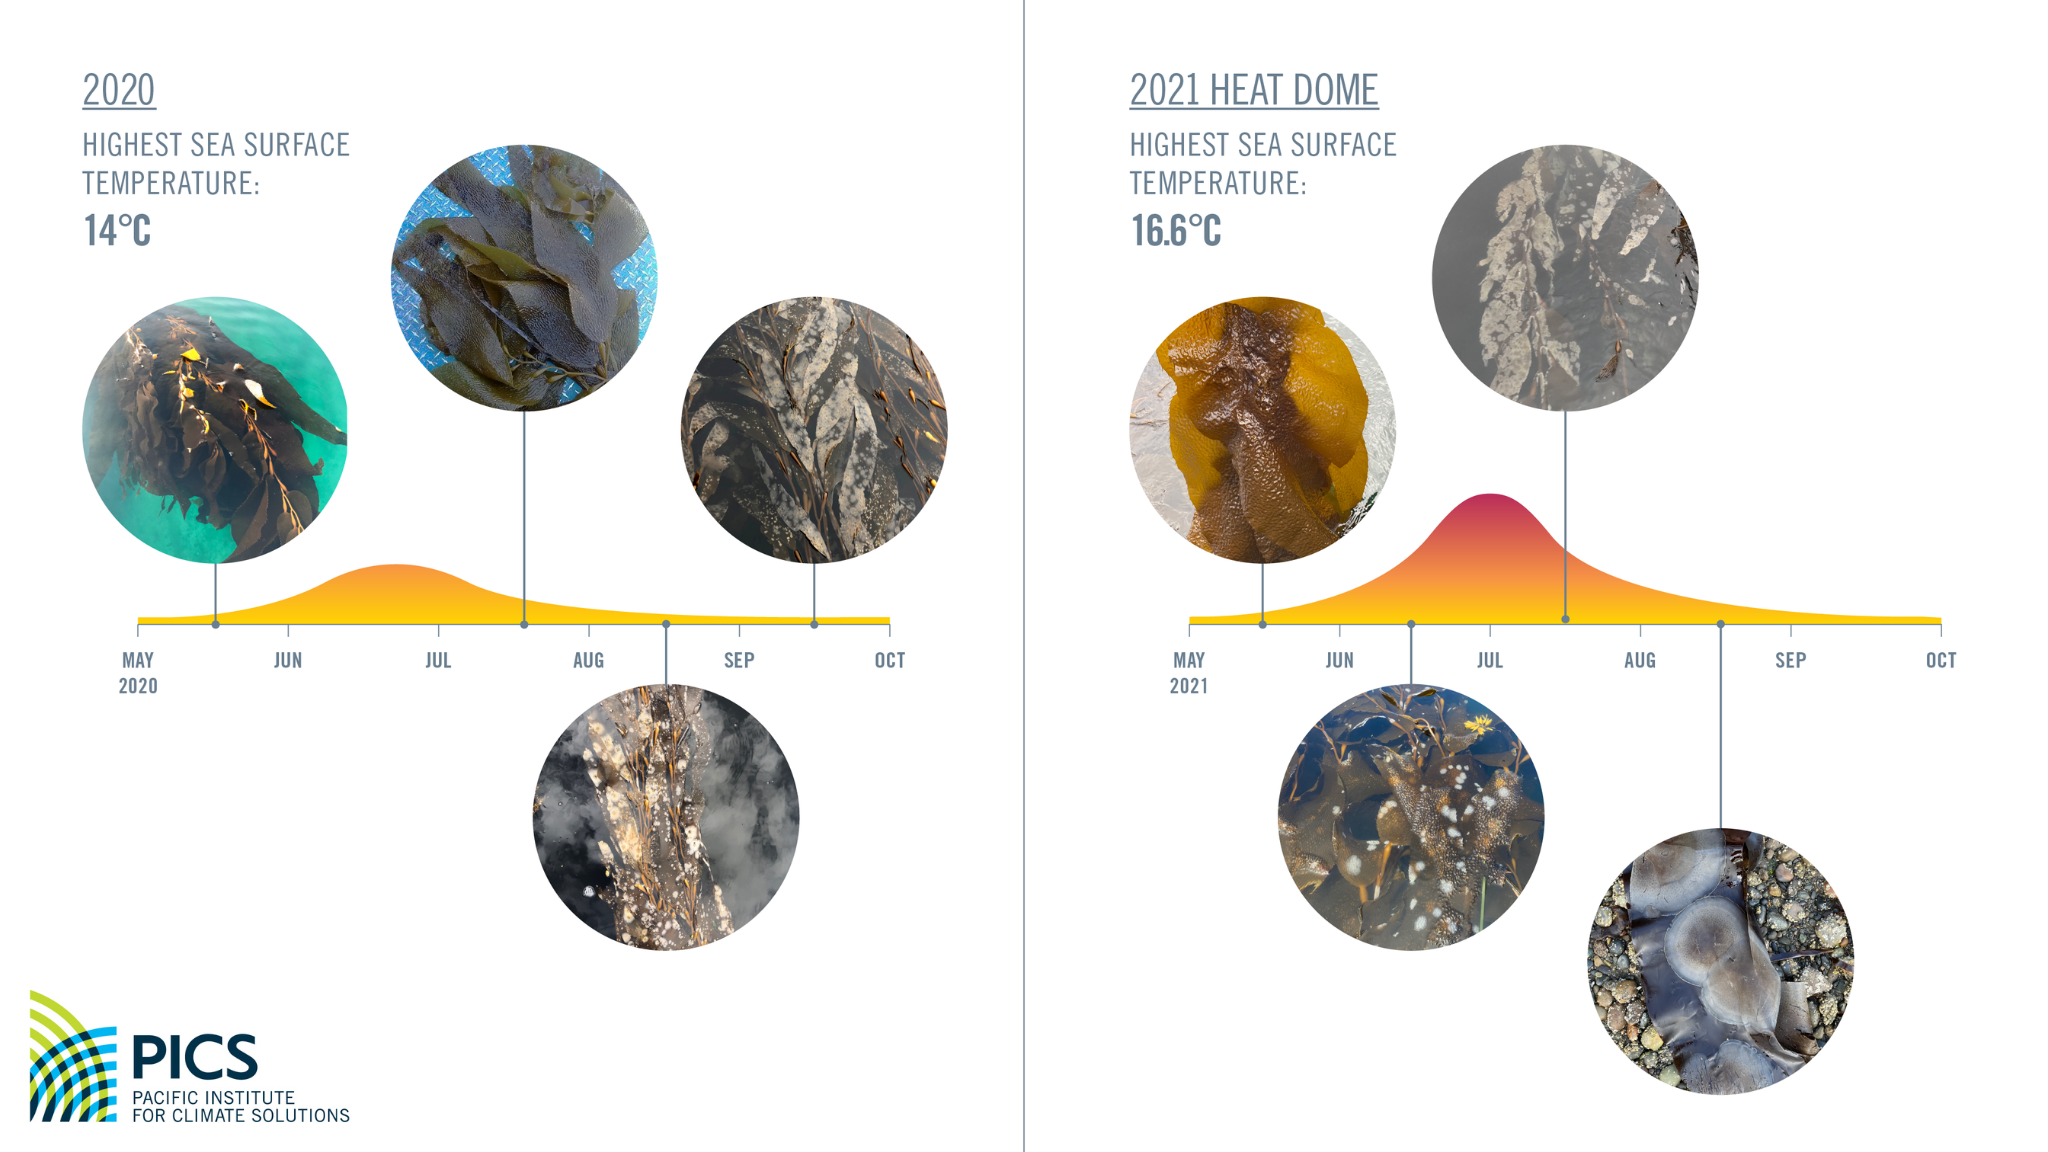 A graph showing the damage and recovery of kelp during the 2021 heat dome. 